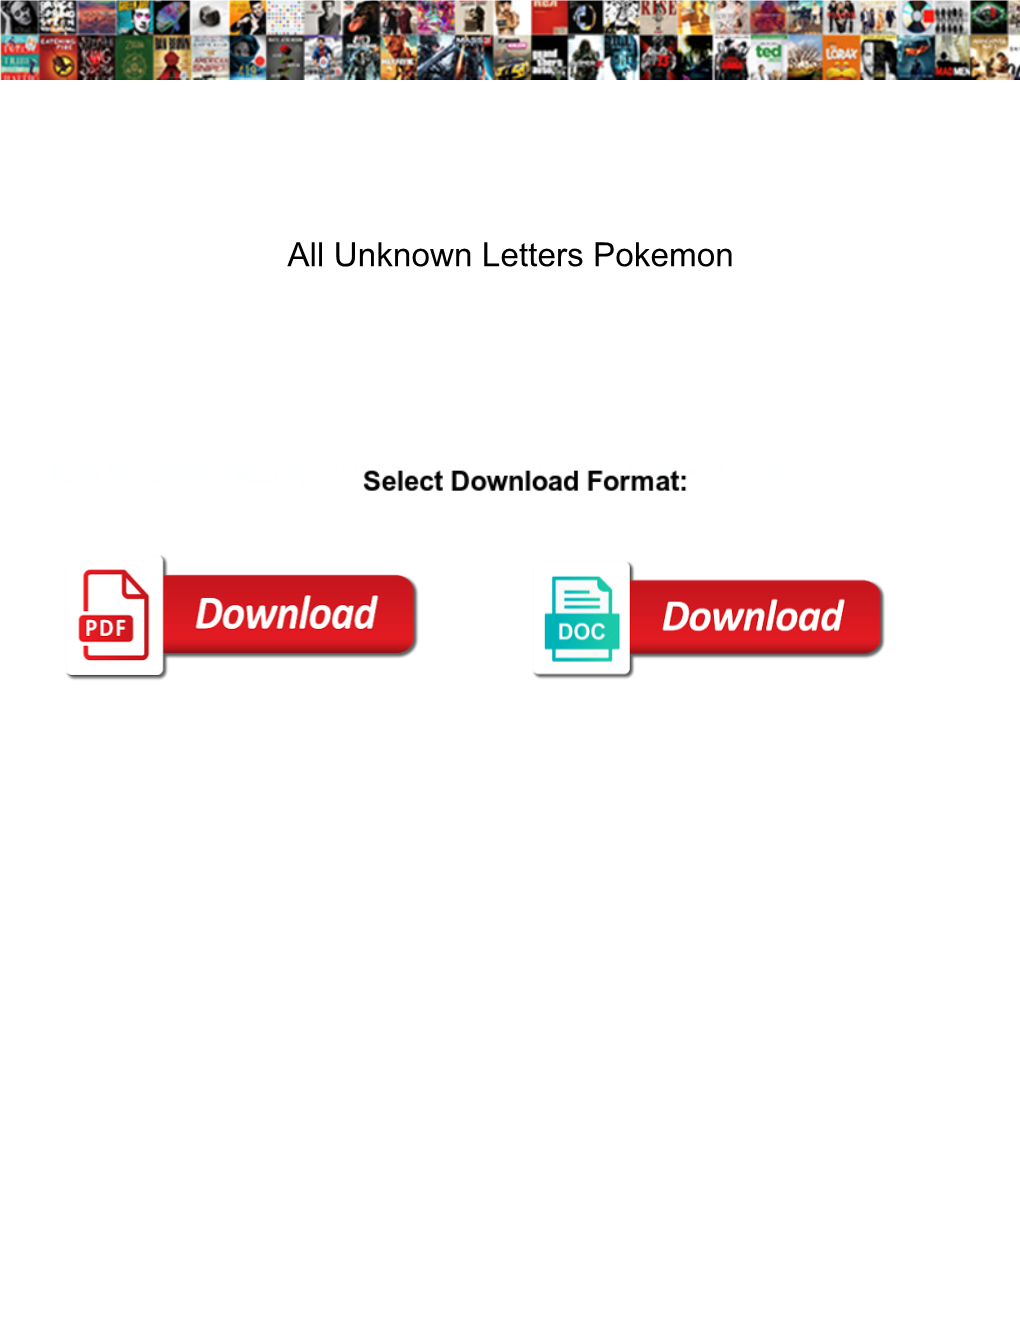 All Unknown Letters Pokemon